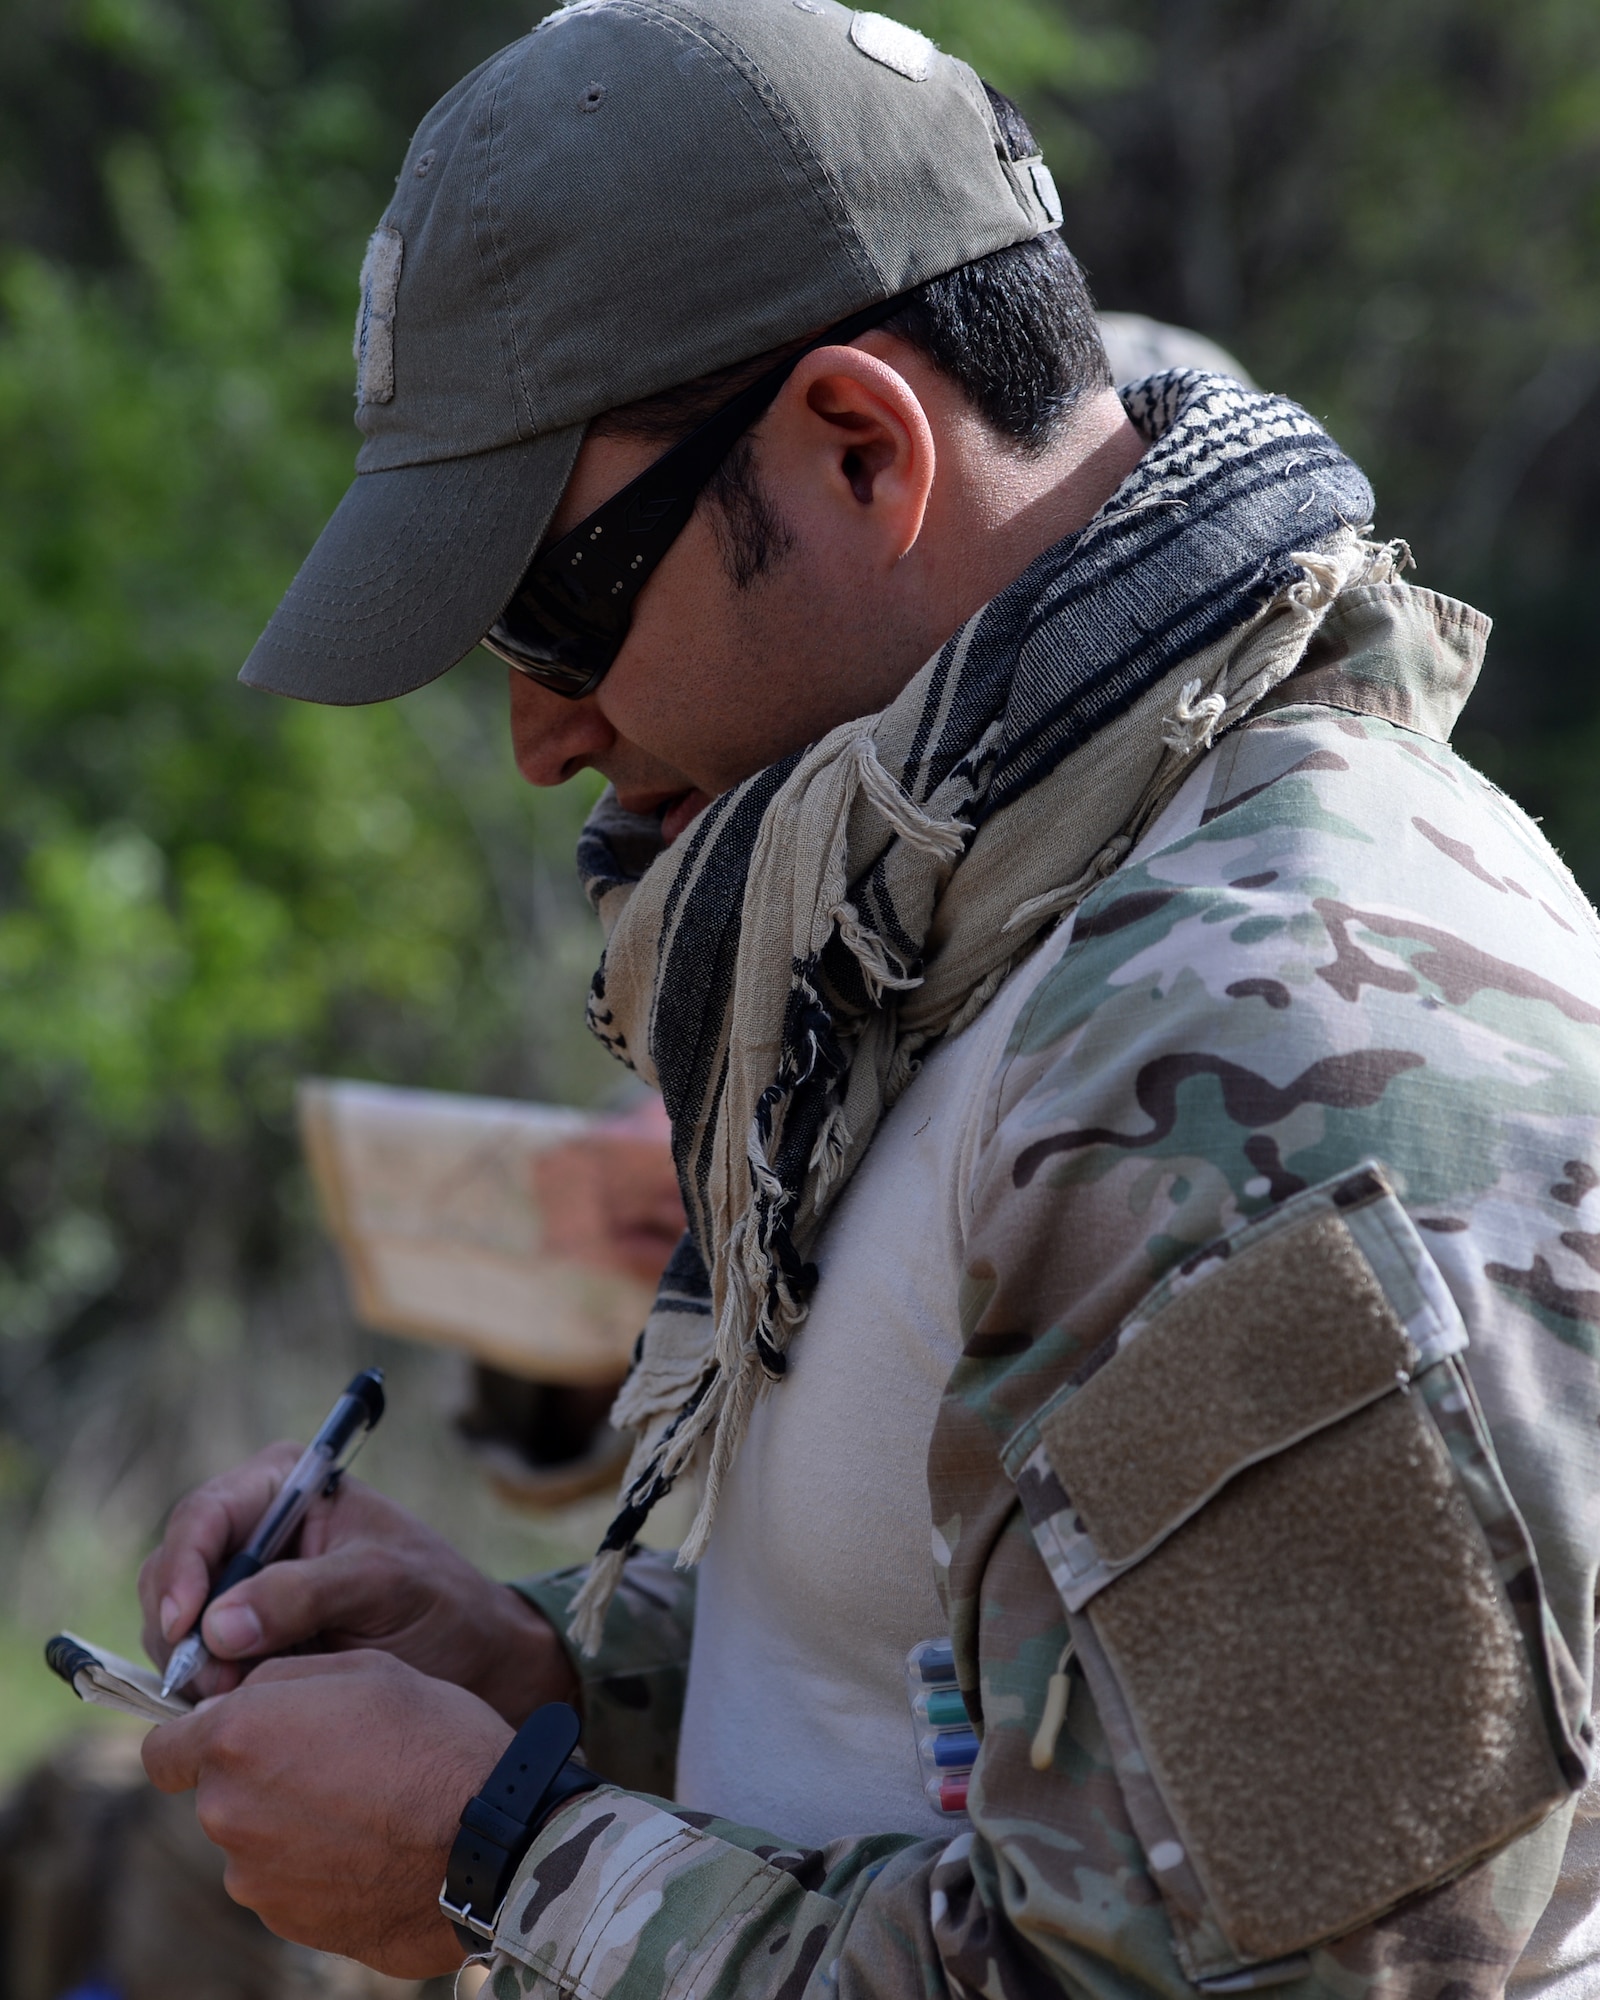 A tactical air control party member from the 147th Air Support Operations Squadron, 147th Reconnaissance Wing, based at Ellington Field Joint Reserve Base in Houston, Texas, prepare to navigate to their first point during a land navigation exercise at Camp Swift in Bastrop, Texas. The squadron travelled to the camp to perform a weeklong field training exercise that allowed the members to maintain their proficiency in their career field.